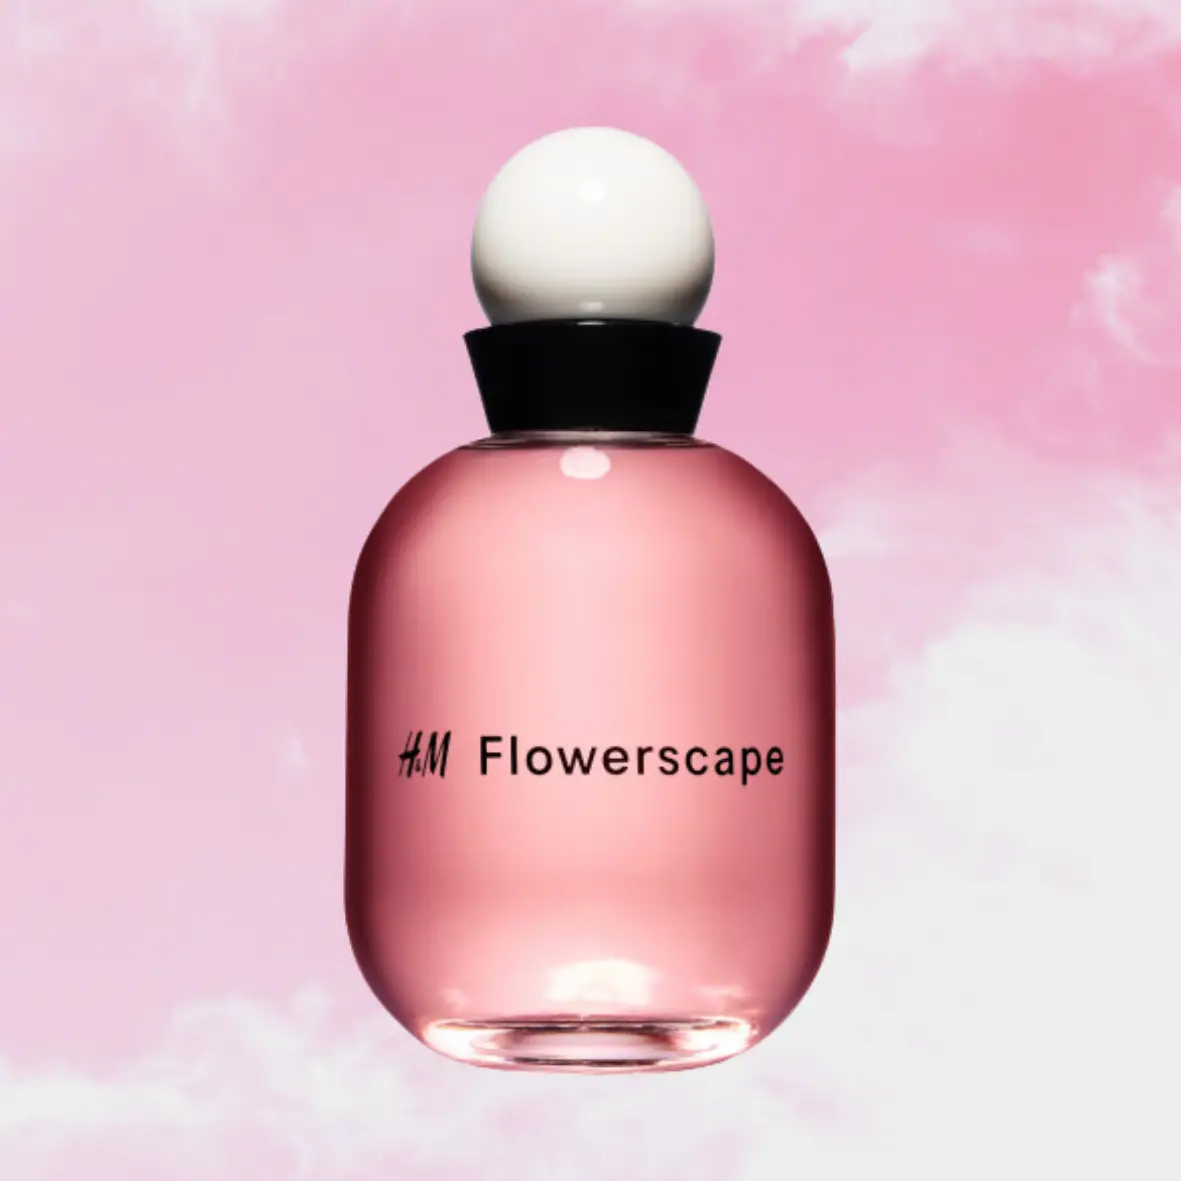 H&M Flowerscape
Best Sweet Pea Blossom Perfumes